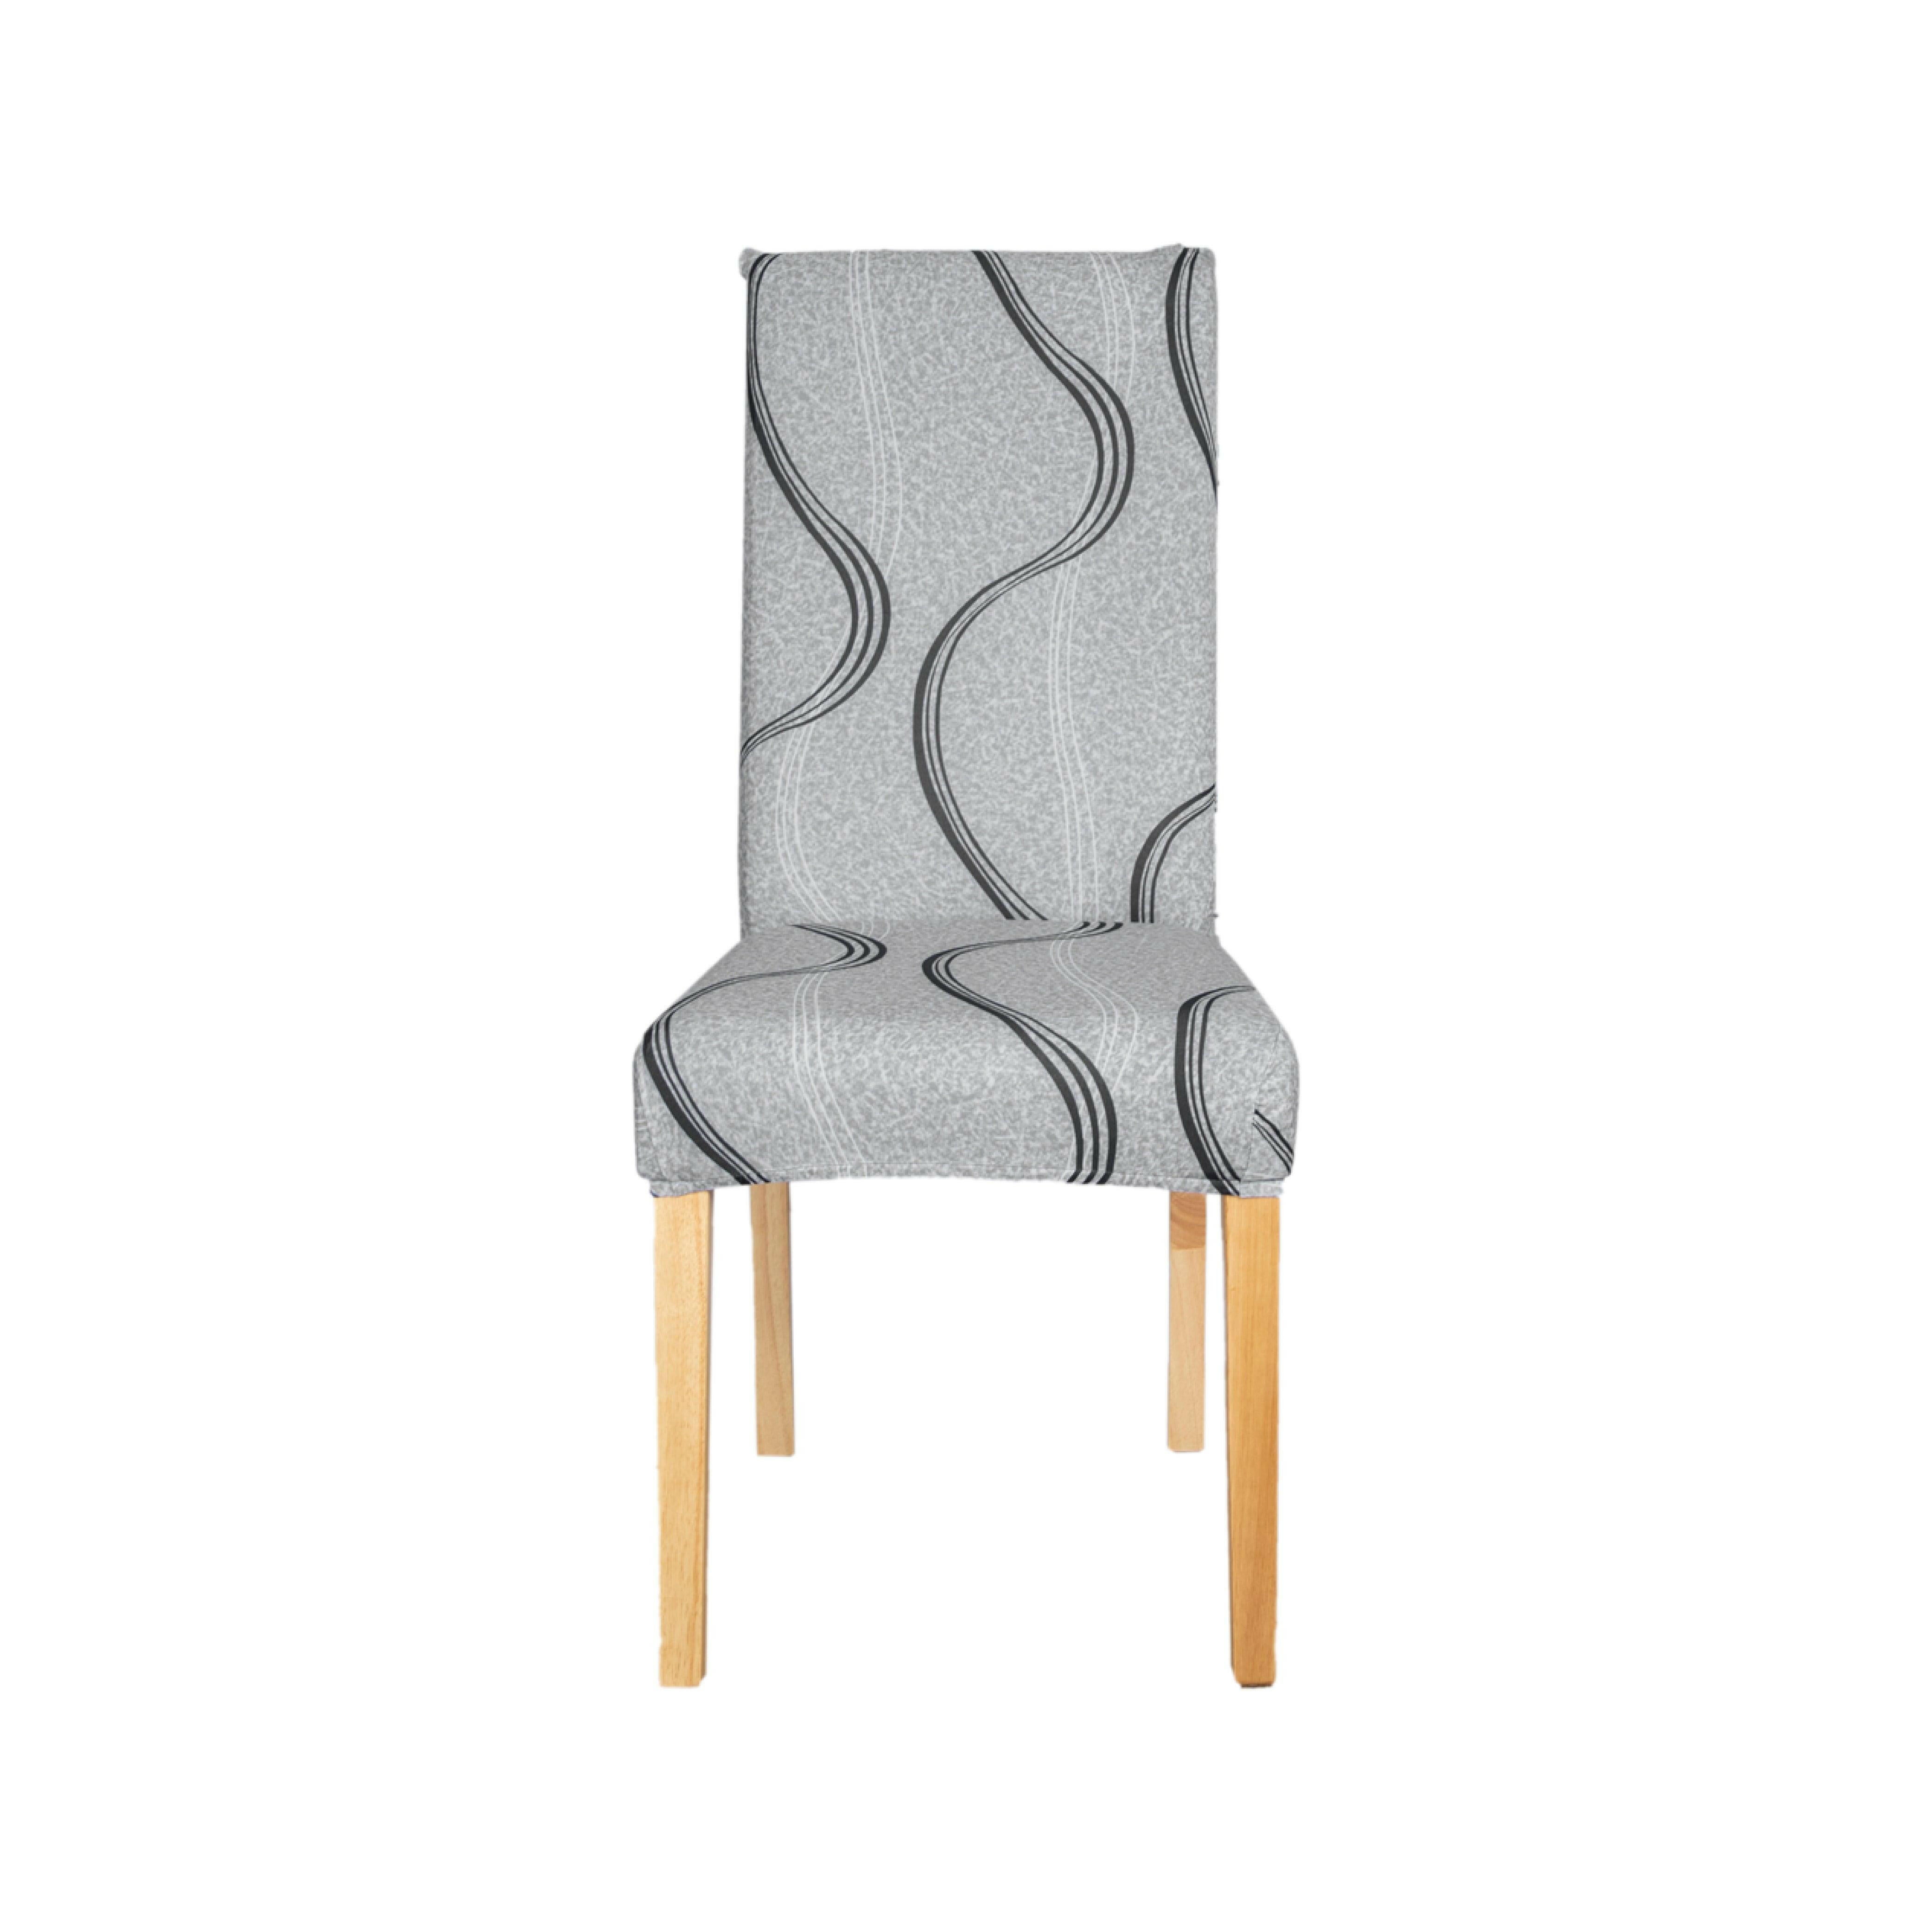 Hyper Cover Stretch Dining Chair Covers with Patterns Grey Moonlight | Chair Covers | Brilliant Home Living